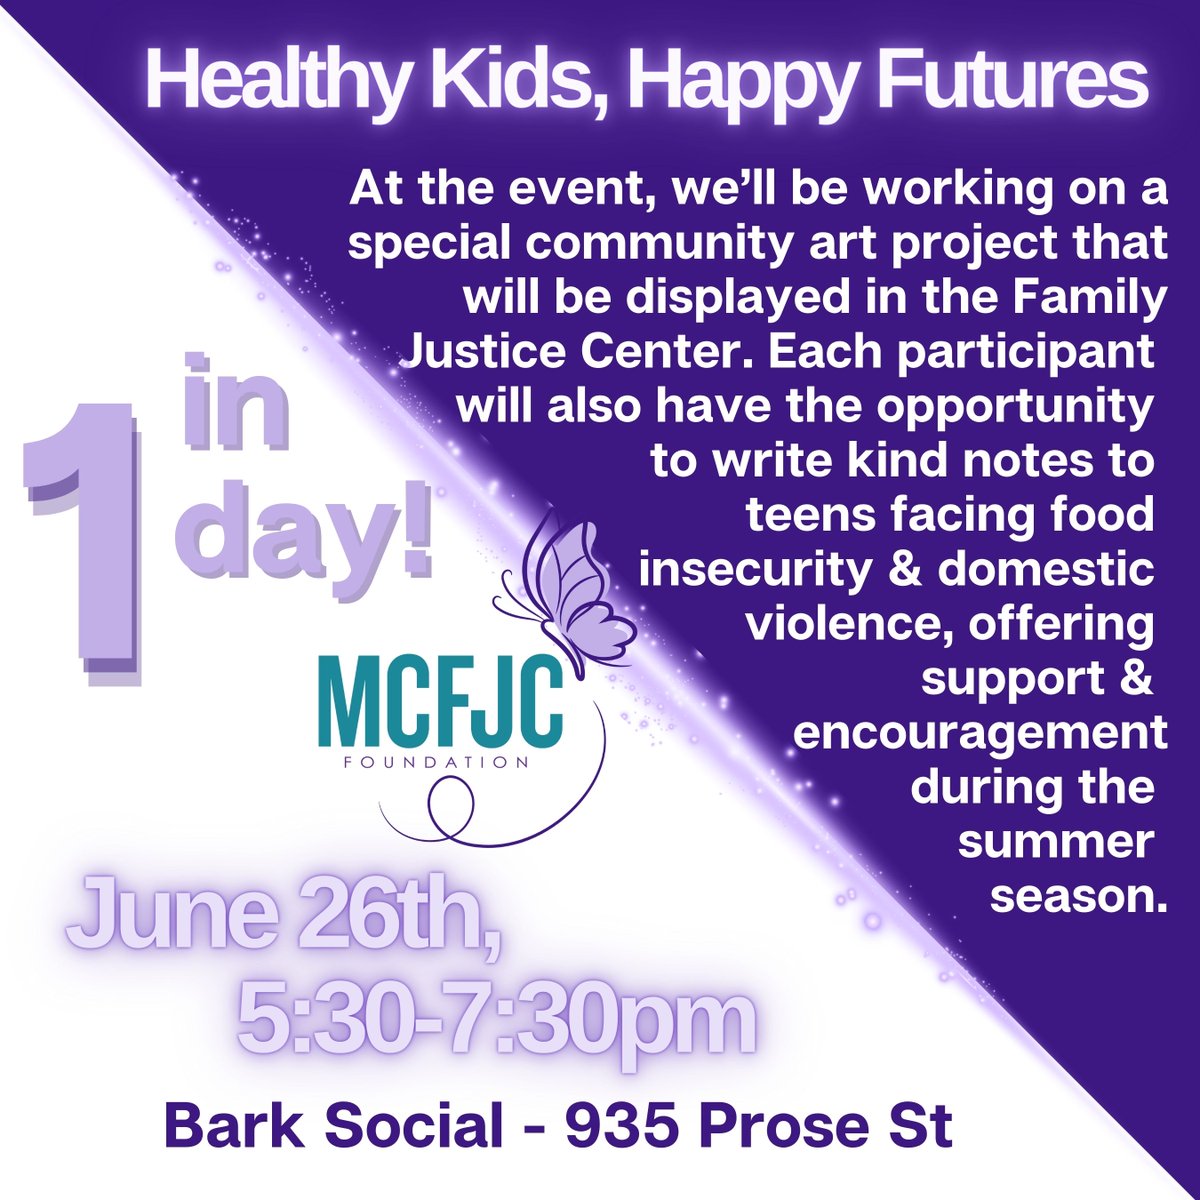 🌟 Join us tomorrow for a day of community and creativity at our “Healthy Kids, Happy Futures” volunteer event! 🌈🎨 This casual and fun-filled gathering will be packed with arts and crafts activities for all ages. #mcfjcfoundation  #arttherapy #volunteerwork #creativekids